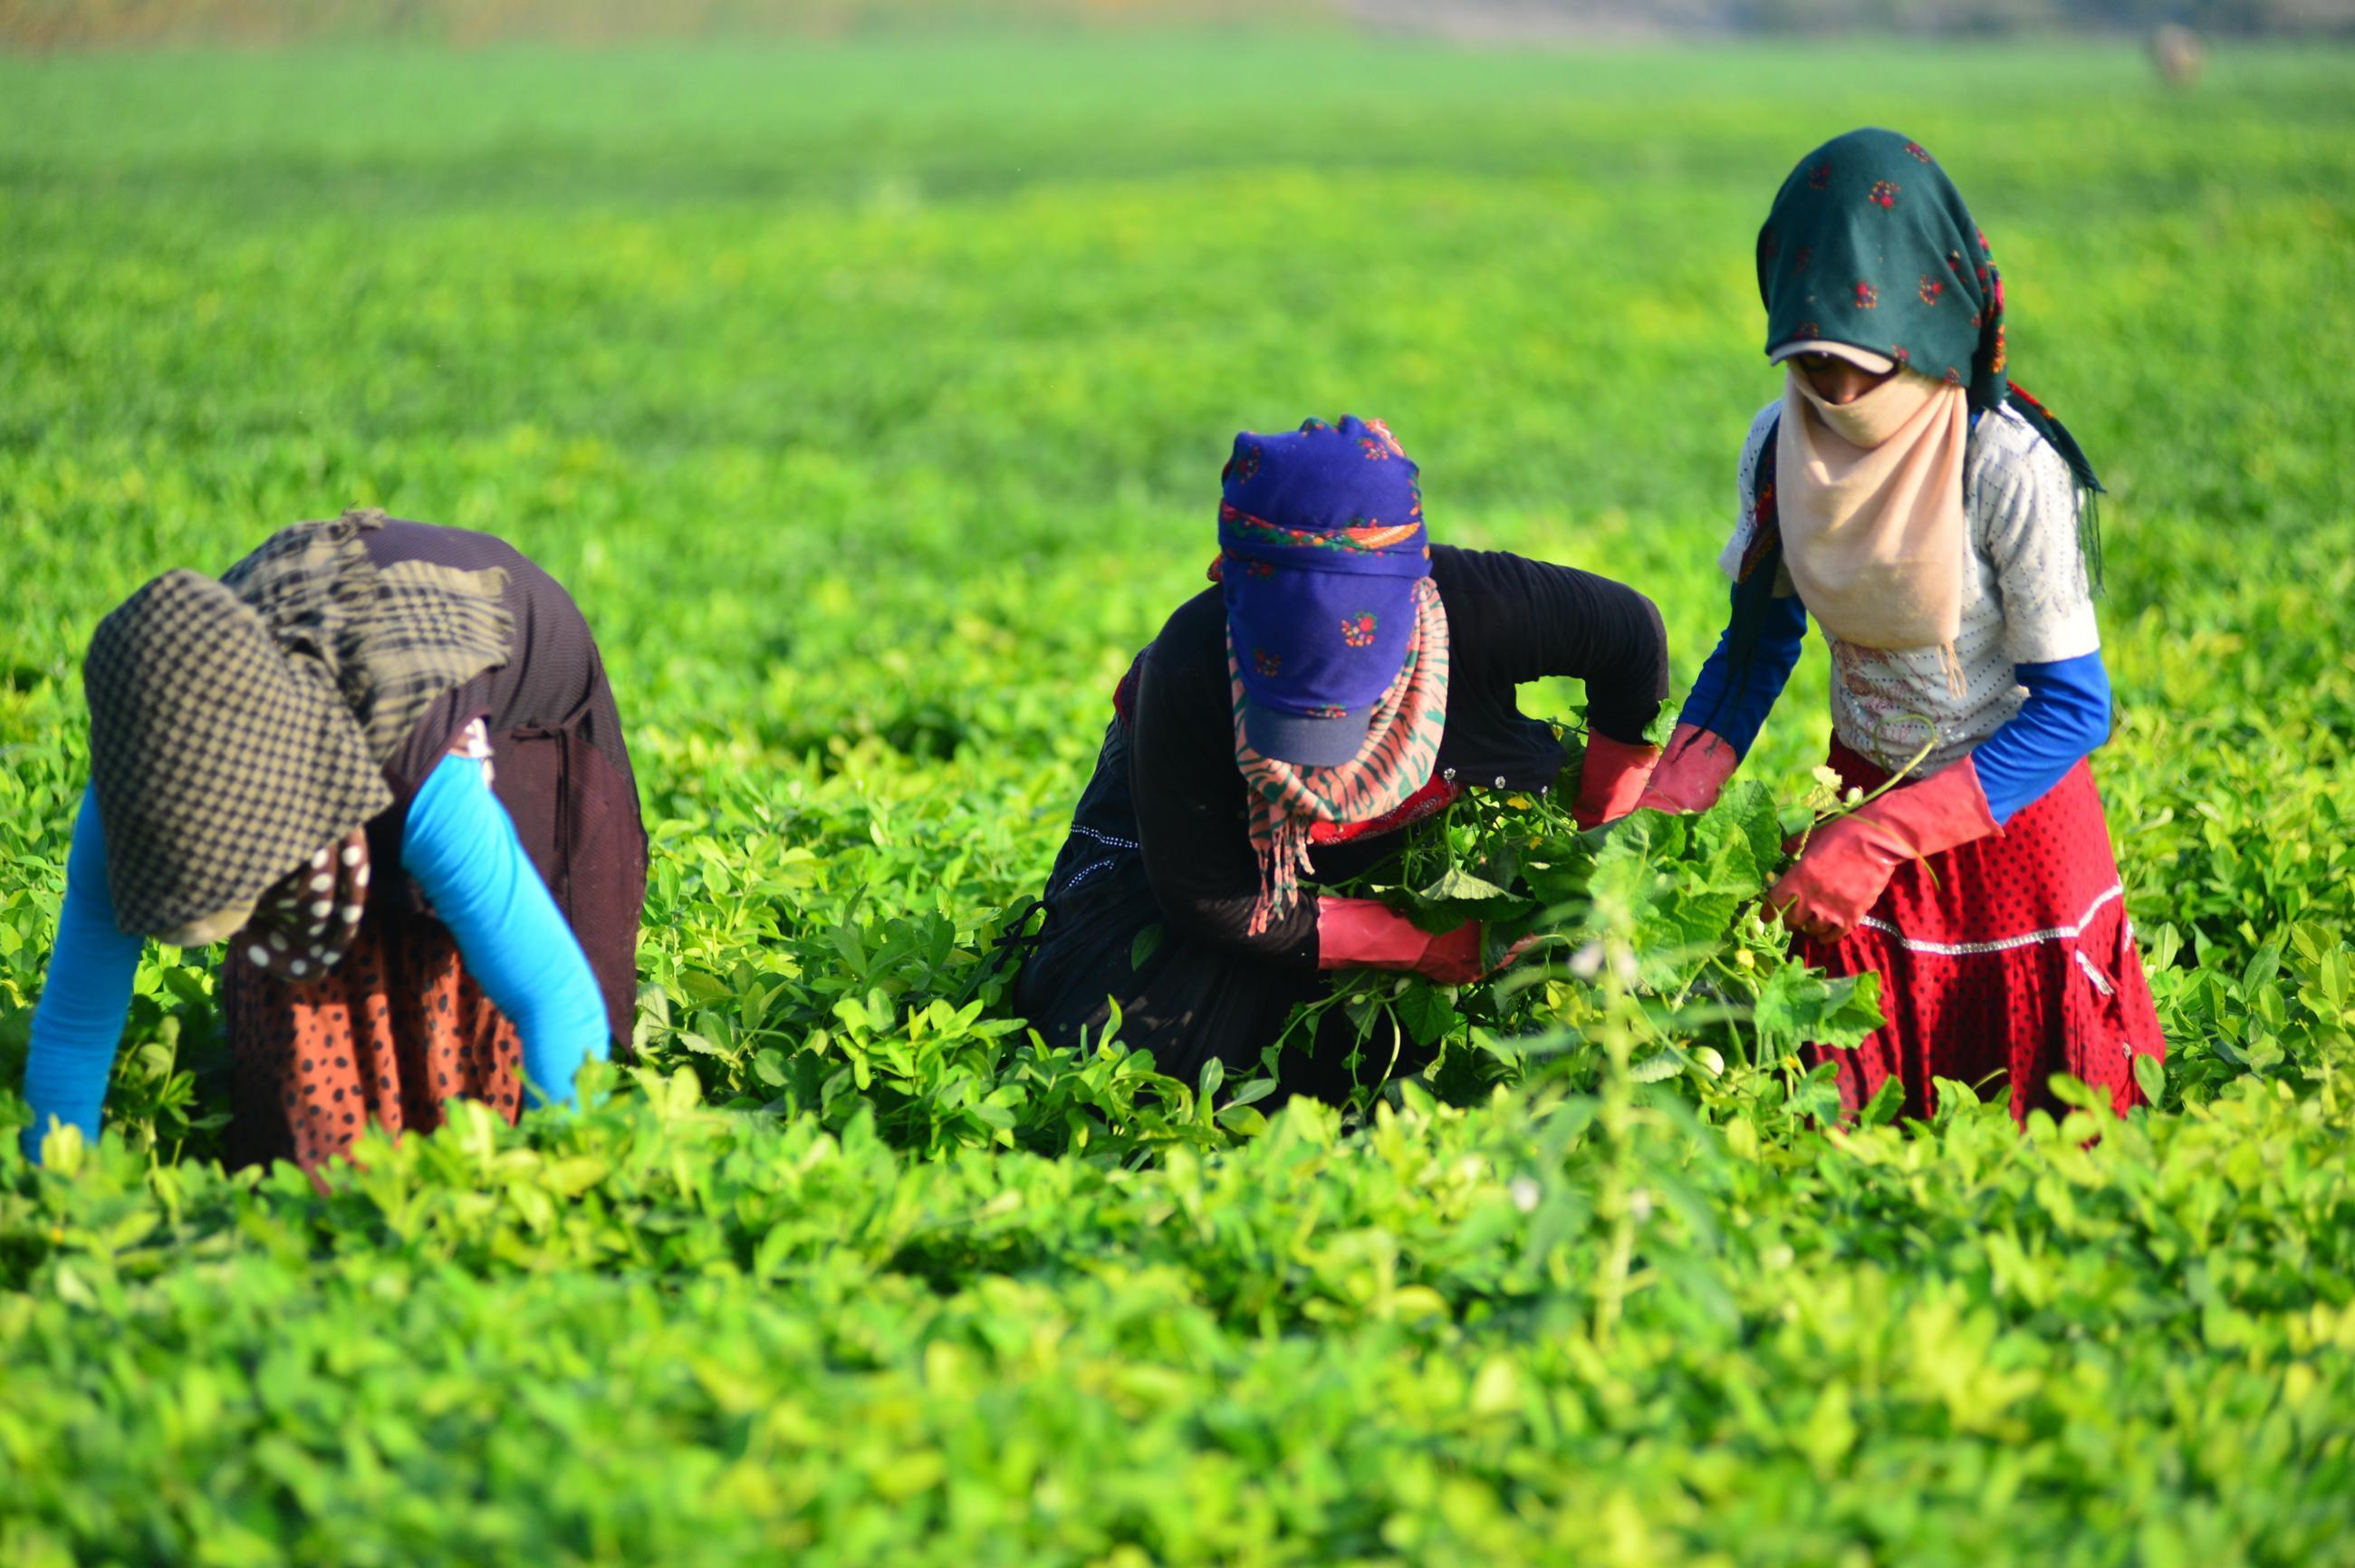 The unsung heroes of agriculture welcomed the Eid al-Adha by working in the heat of Adana